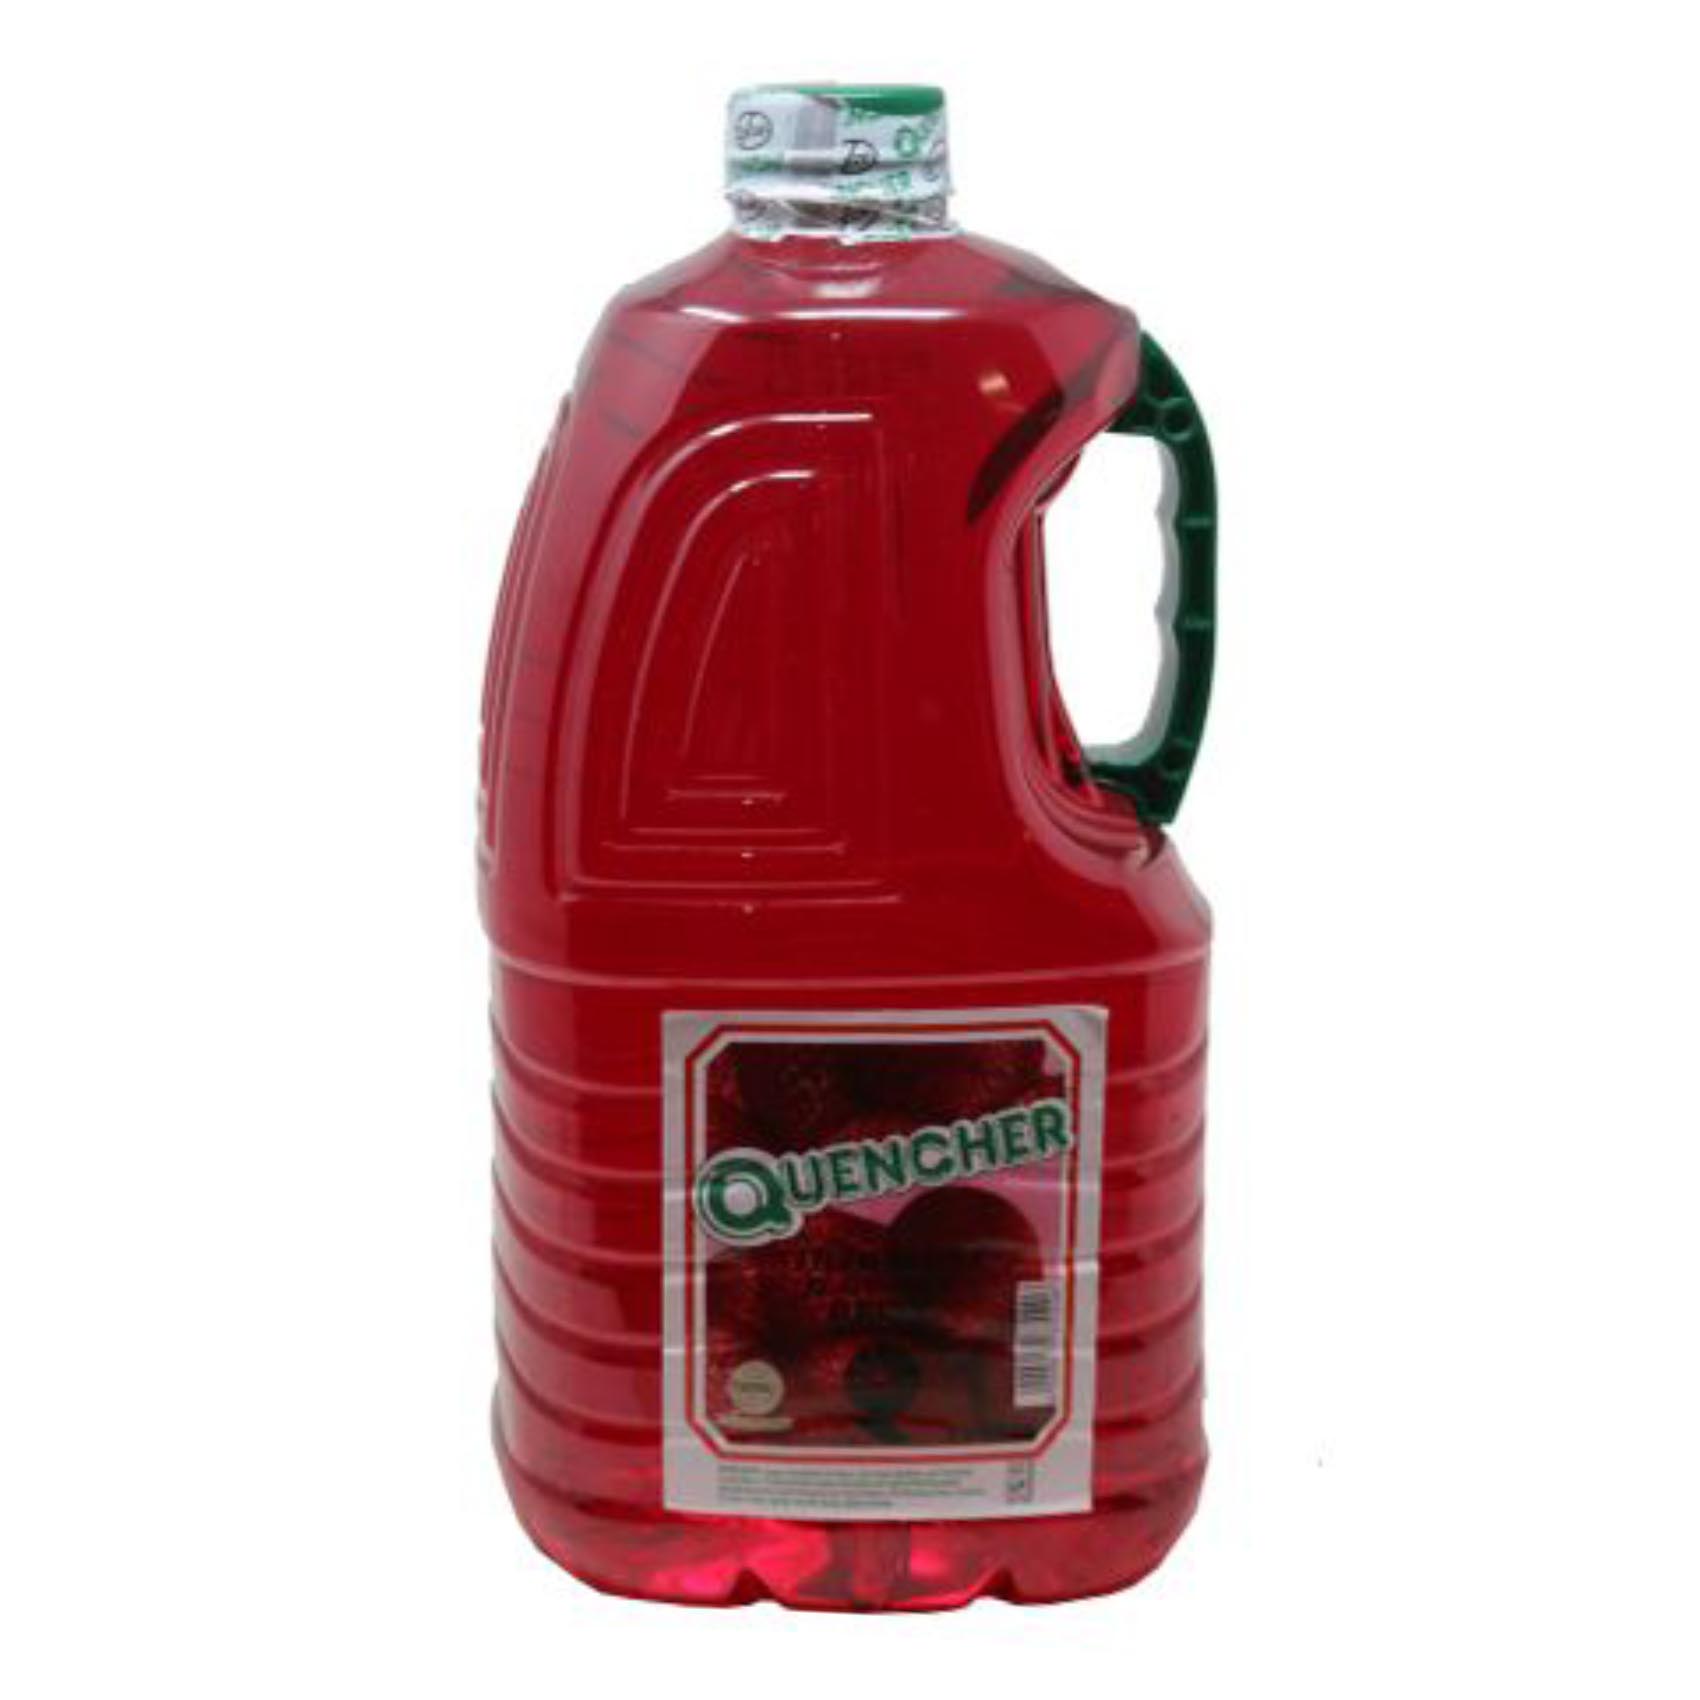 Quencher Strawberry Drink 5L